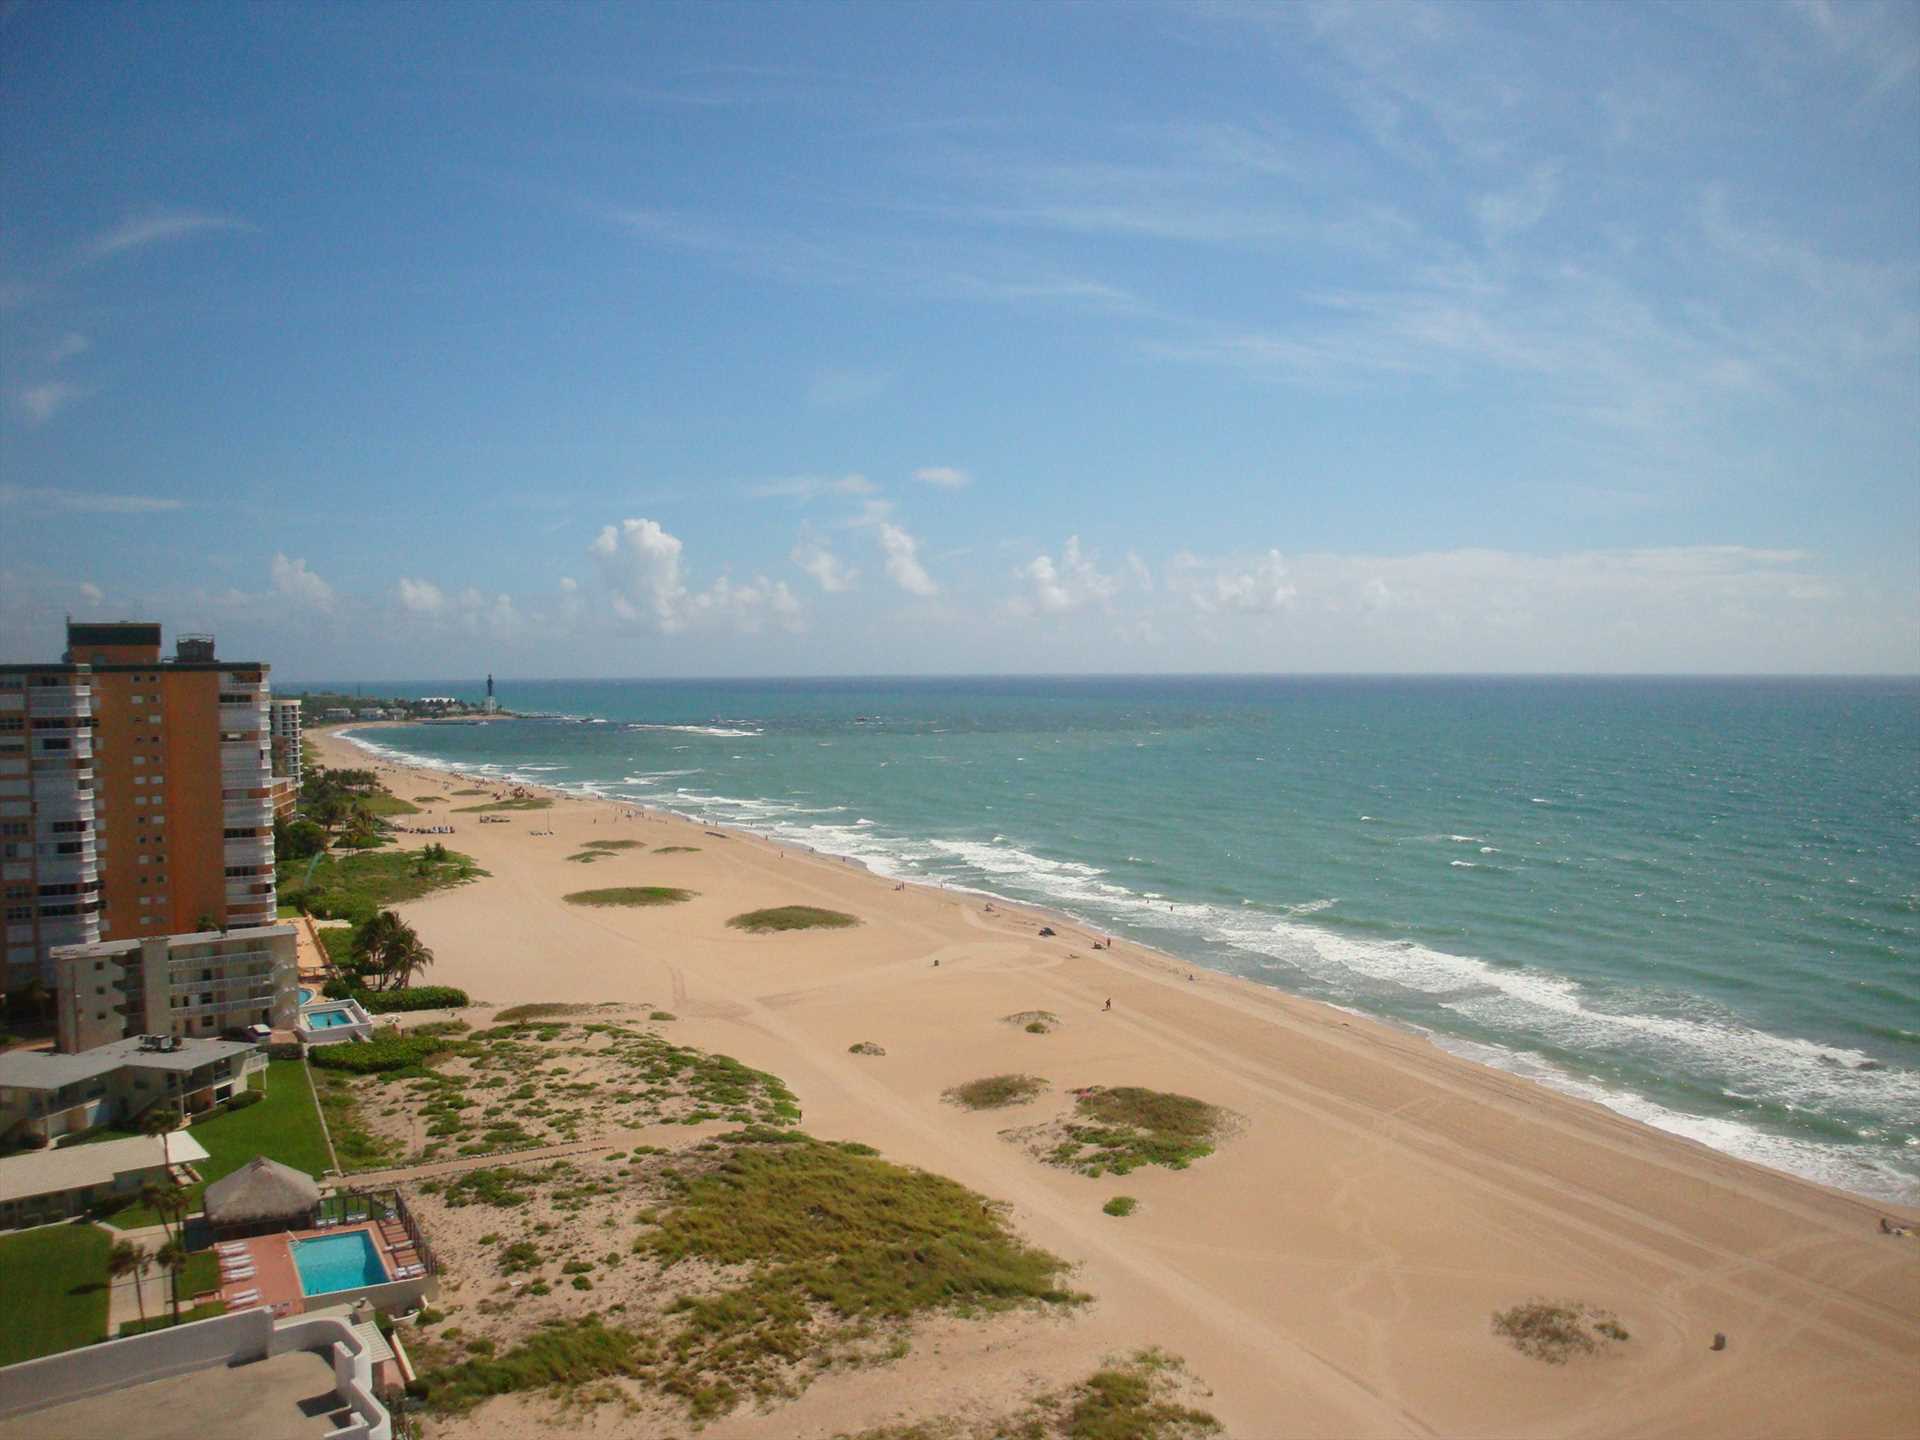 The warm ocean breezes, surf and sand await your arrival!